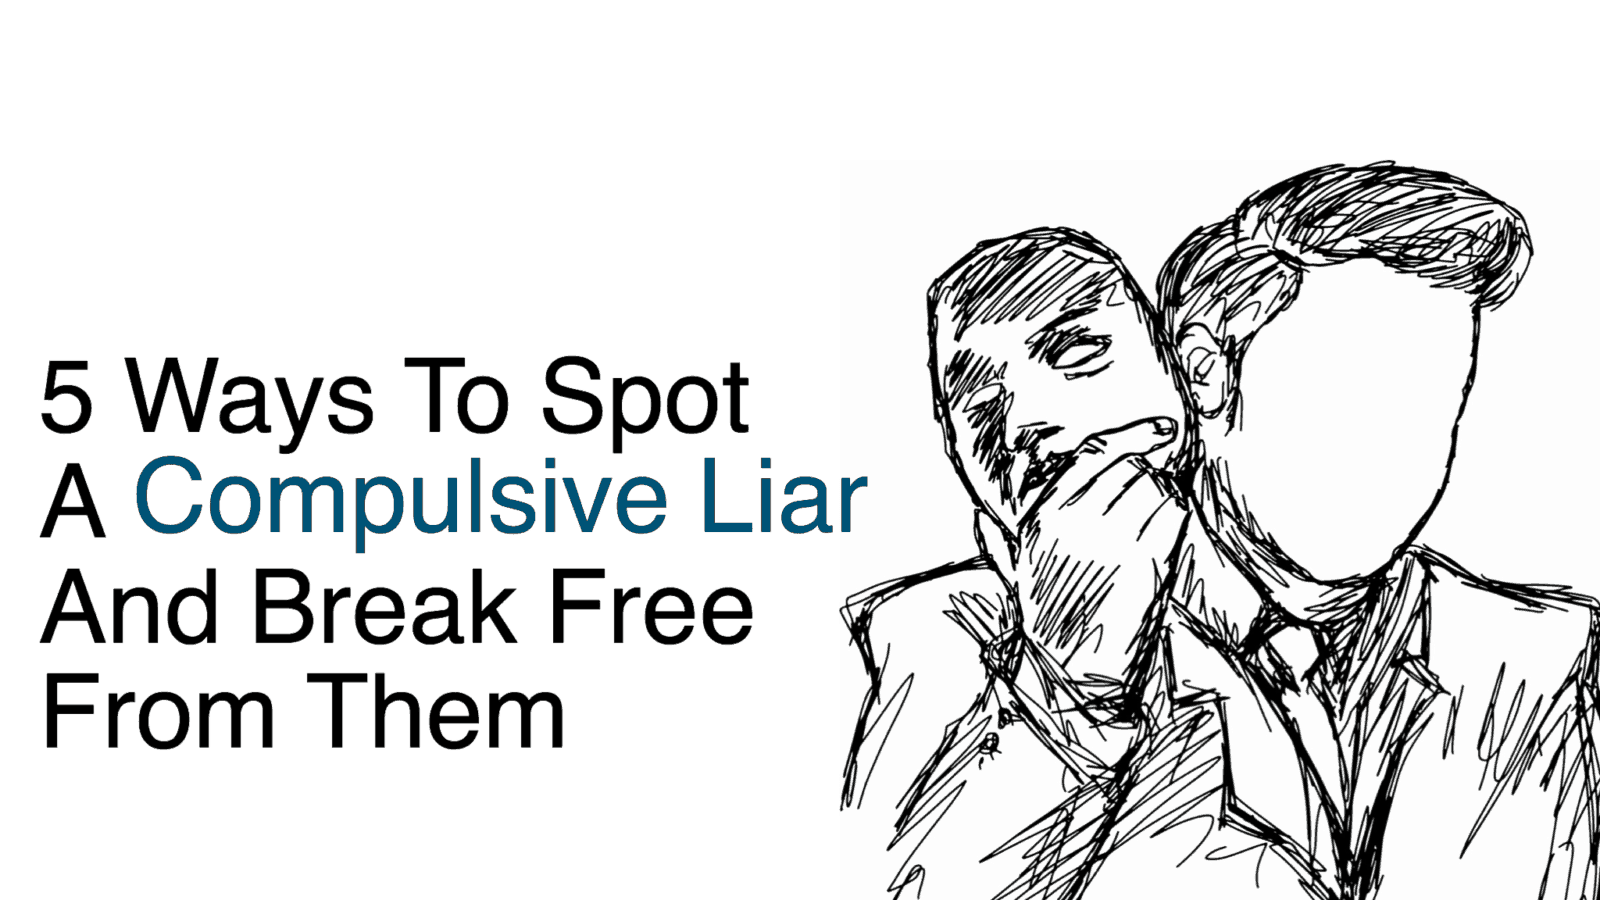 5 Ways To Spot A Compulsive Liar And Break Free From Them.